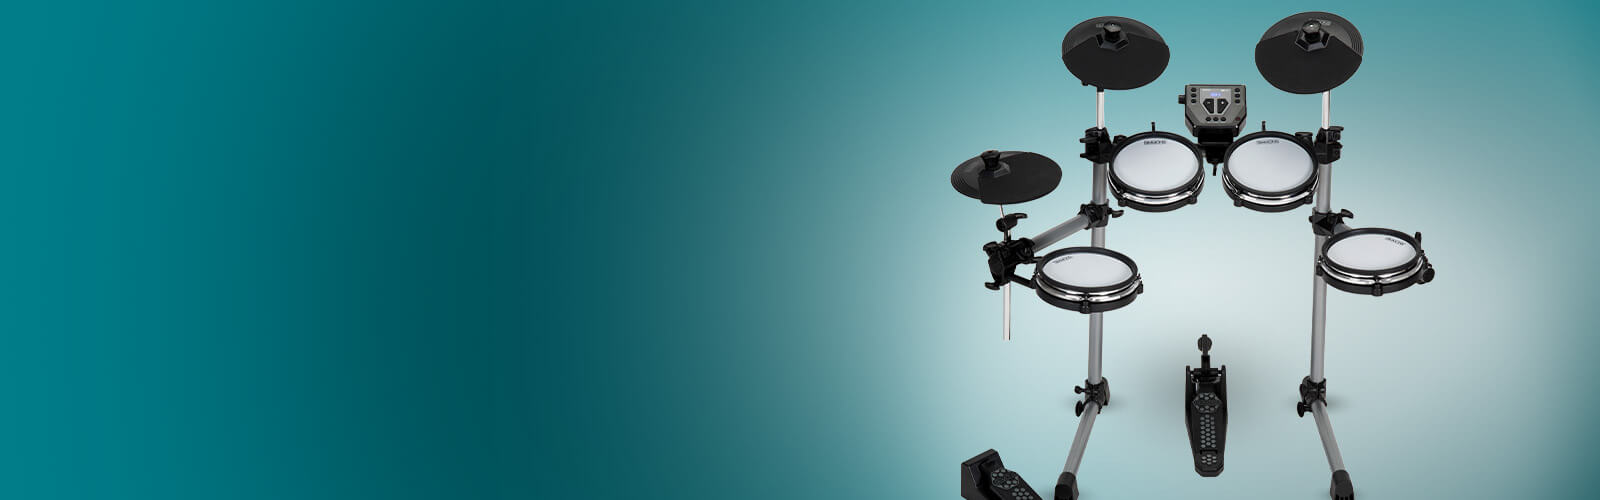 Simmons SD600 electronic drum kit on teal background